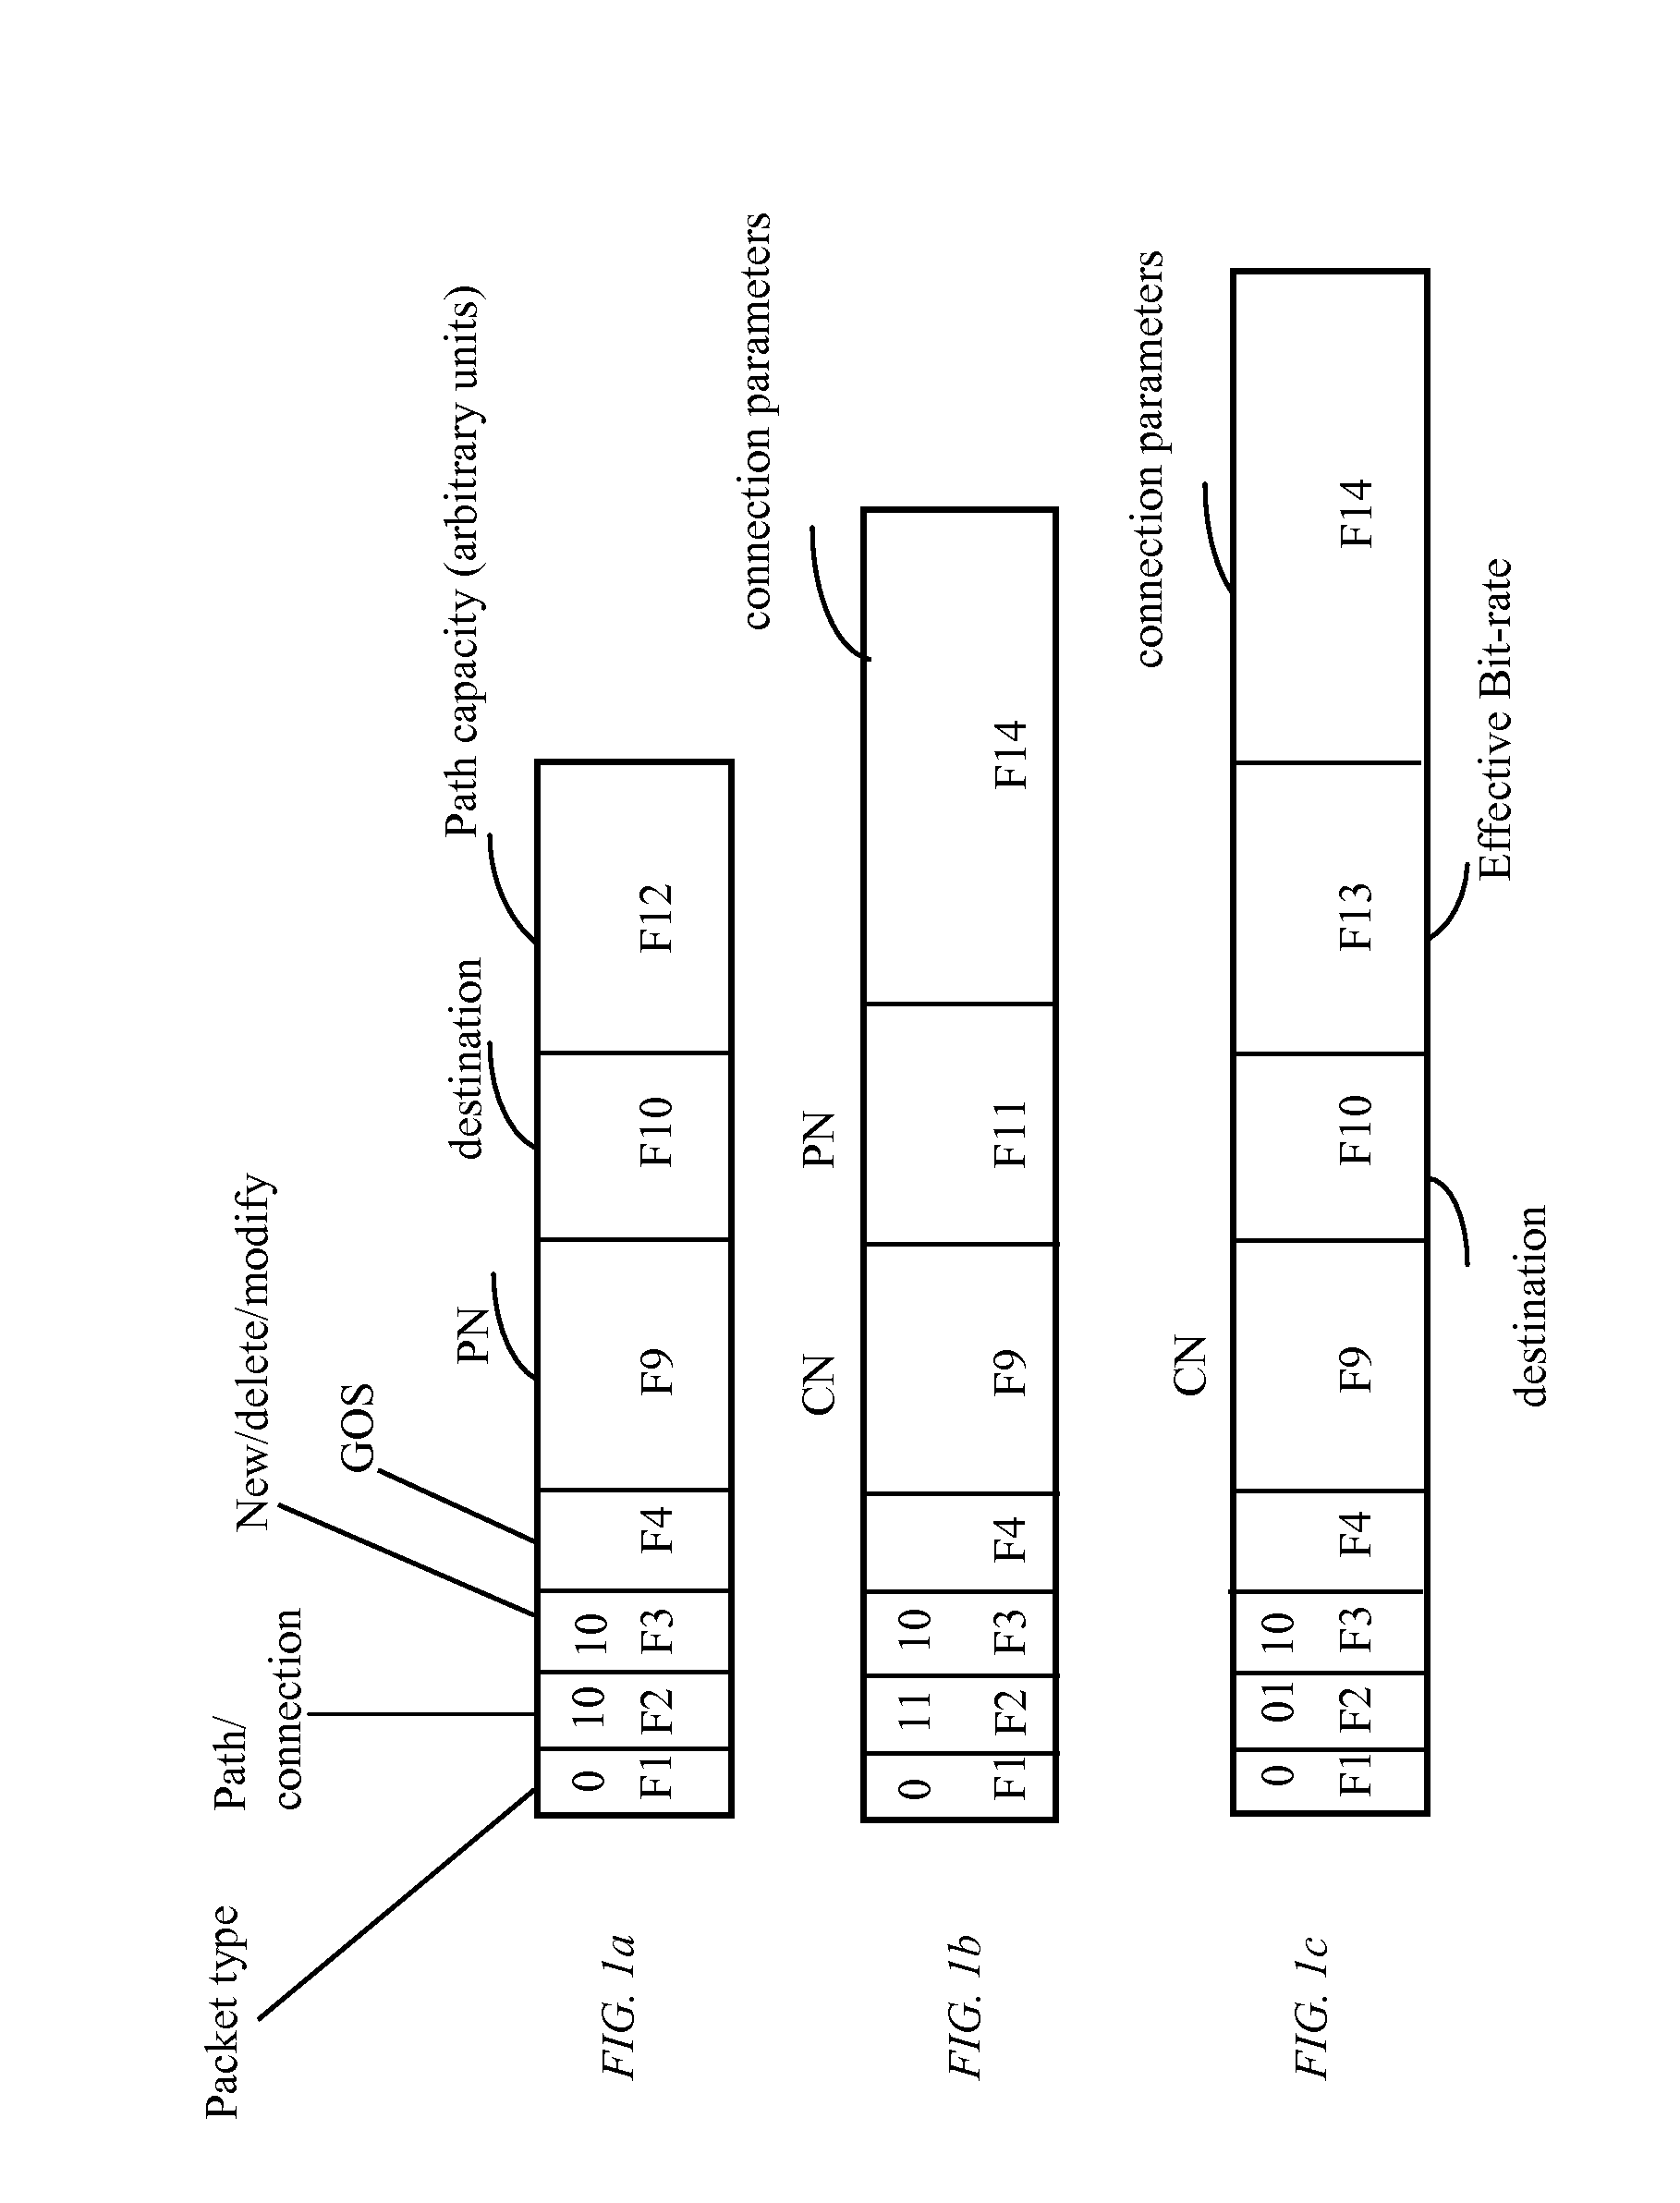 Routing and rate control in a universal transfer mode network